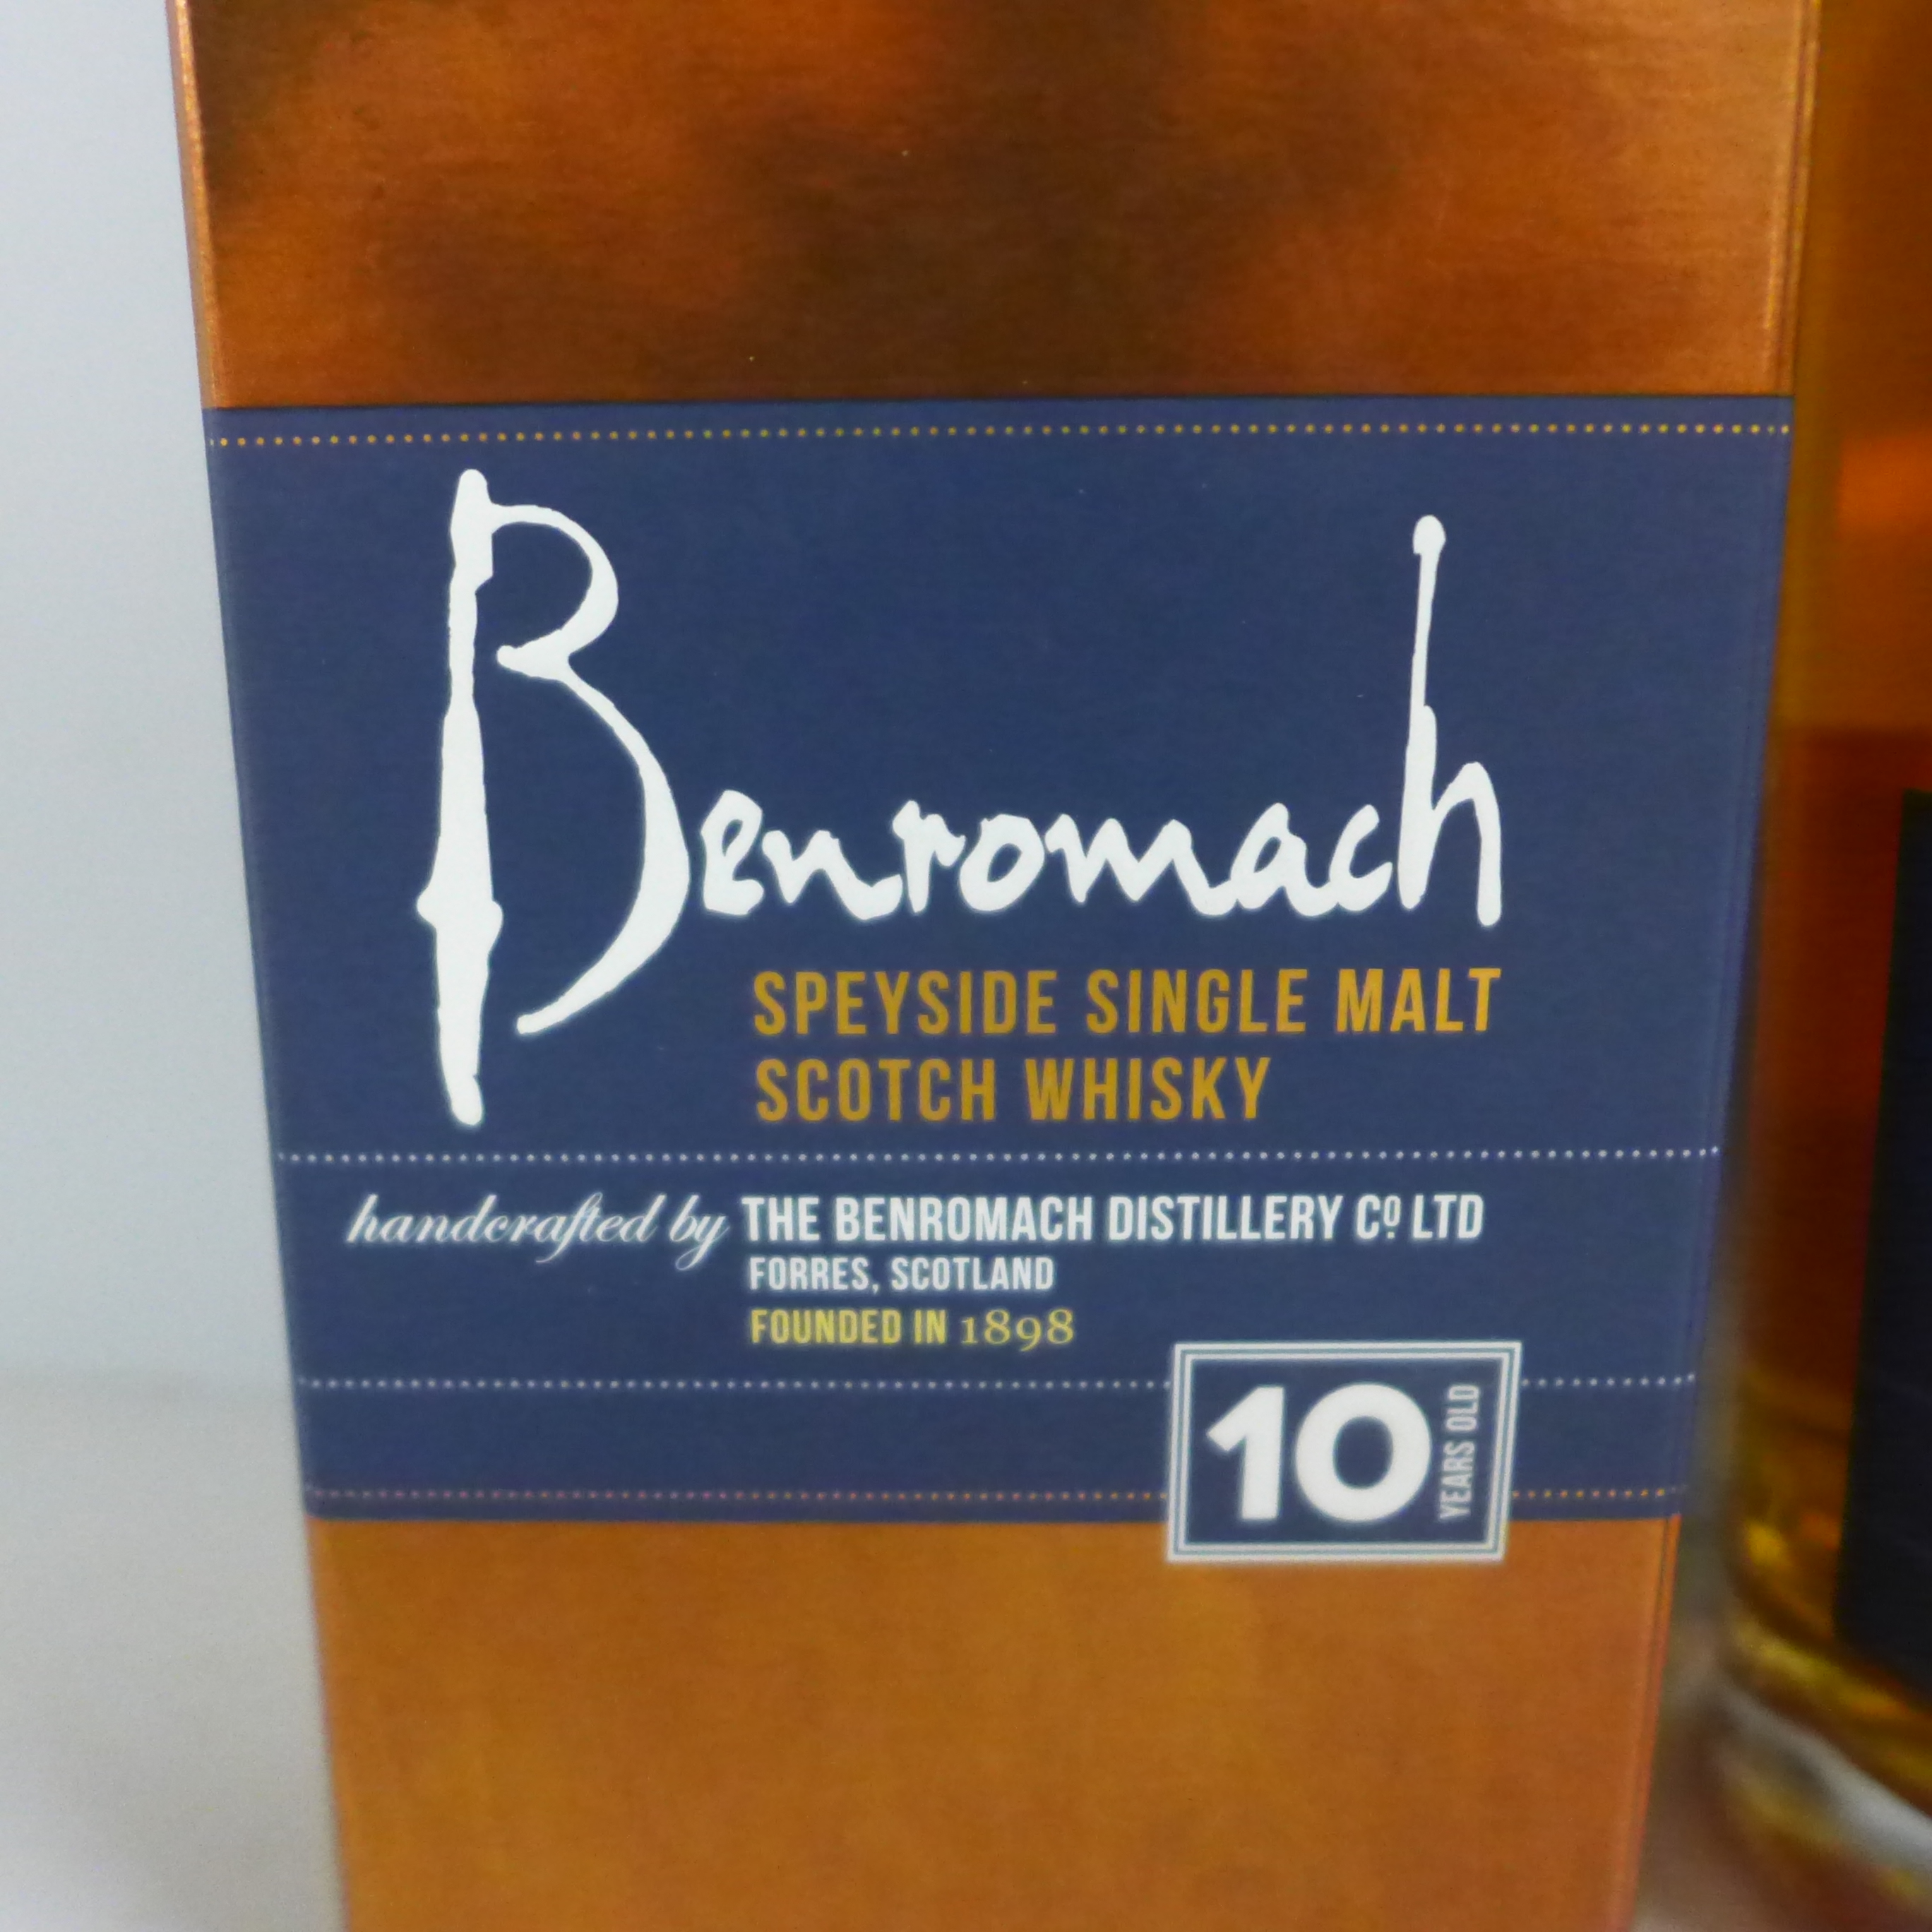 A bottle of Benromach Speyside Single Malt Scotch Whisky, 10 years old, boxed - Image 2 of 4